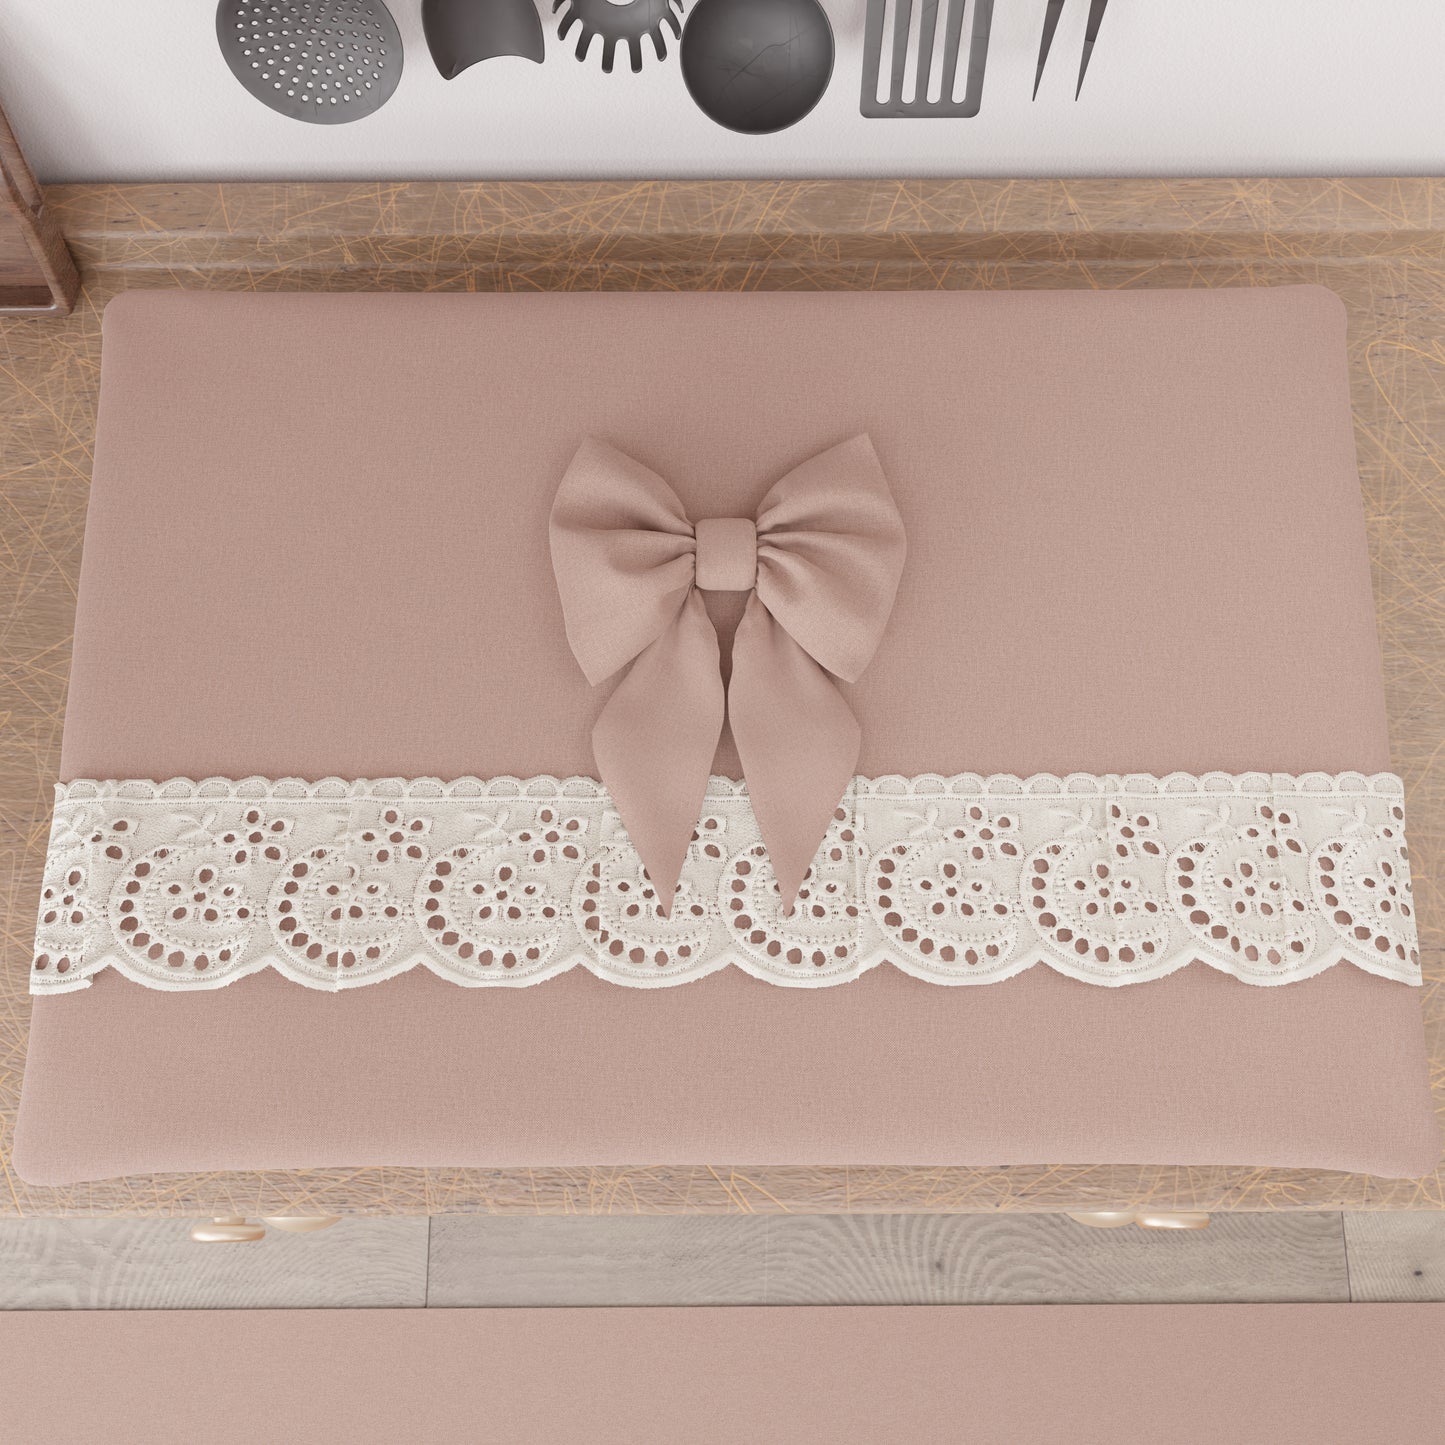 Shabby Chic Stove Cover with Lace and Powder Bow